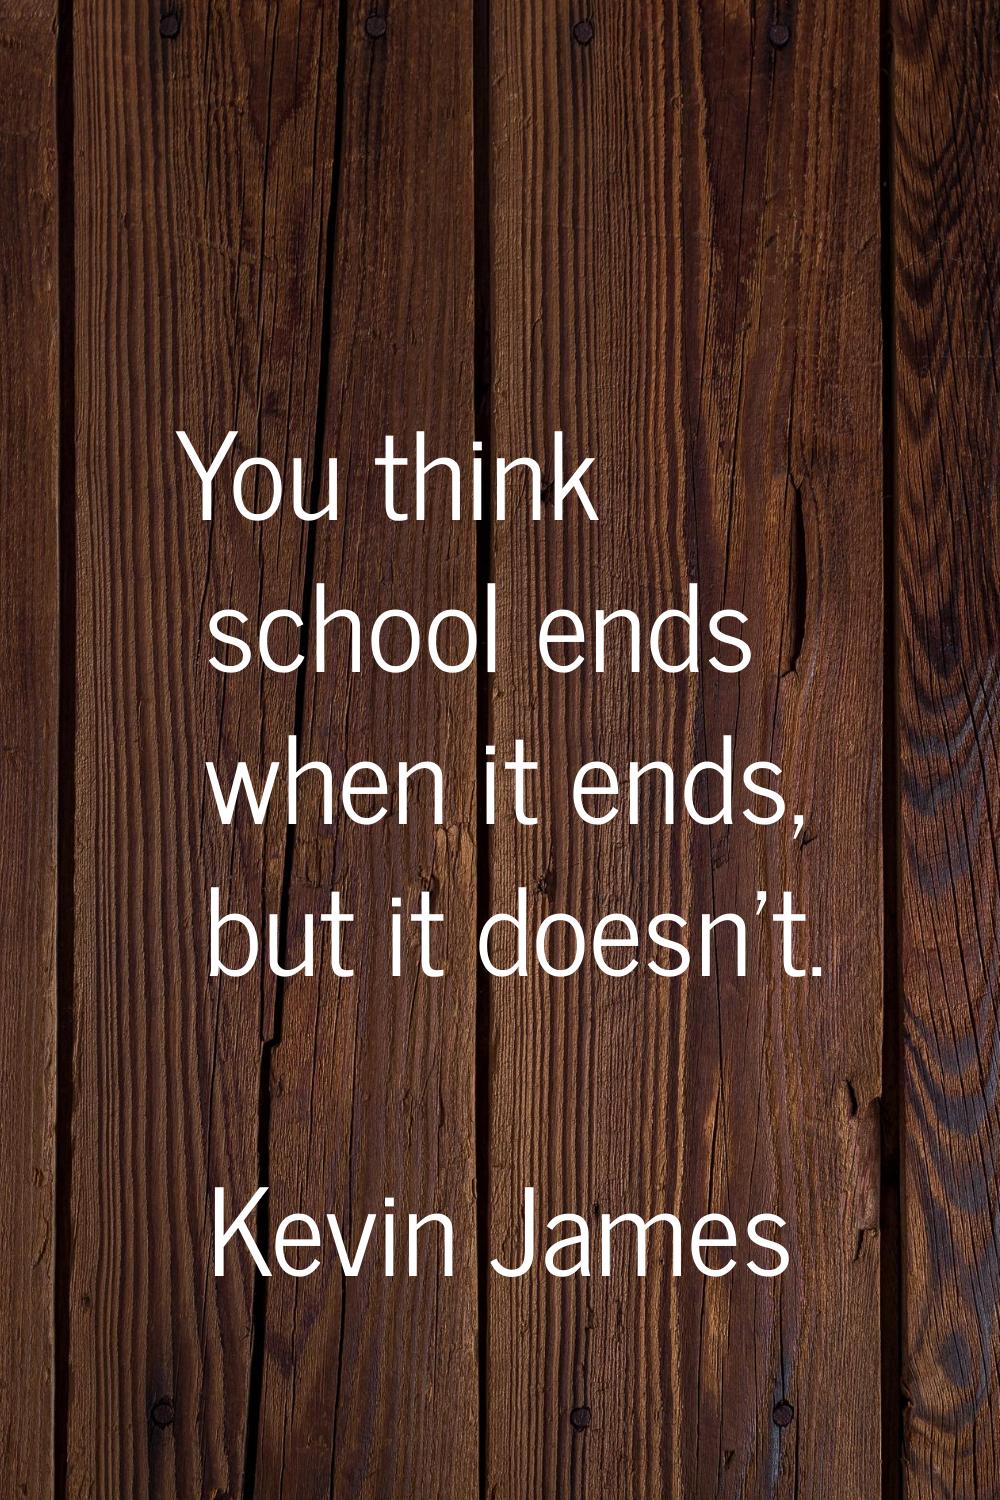 You think school ends when it ends, but it doesn't.